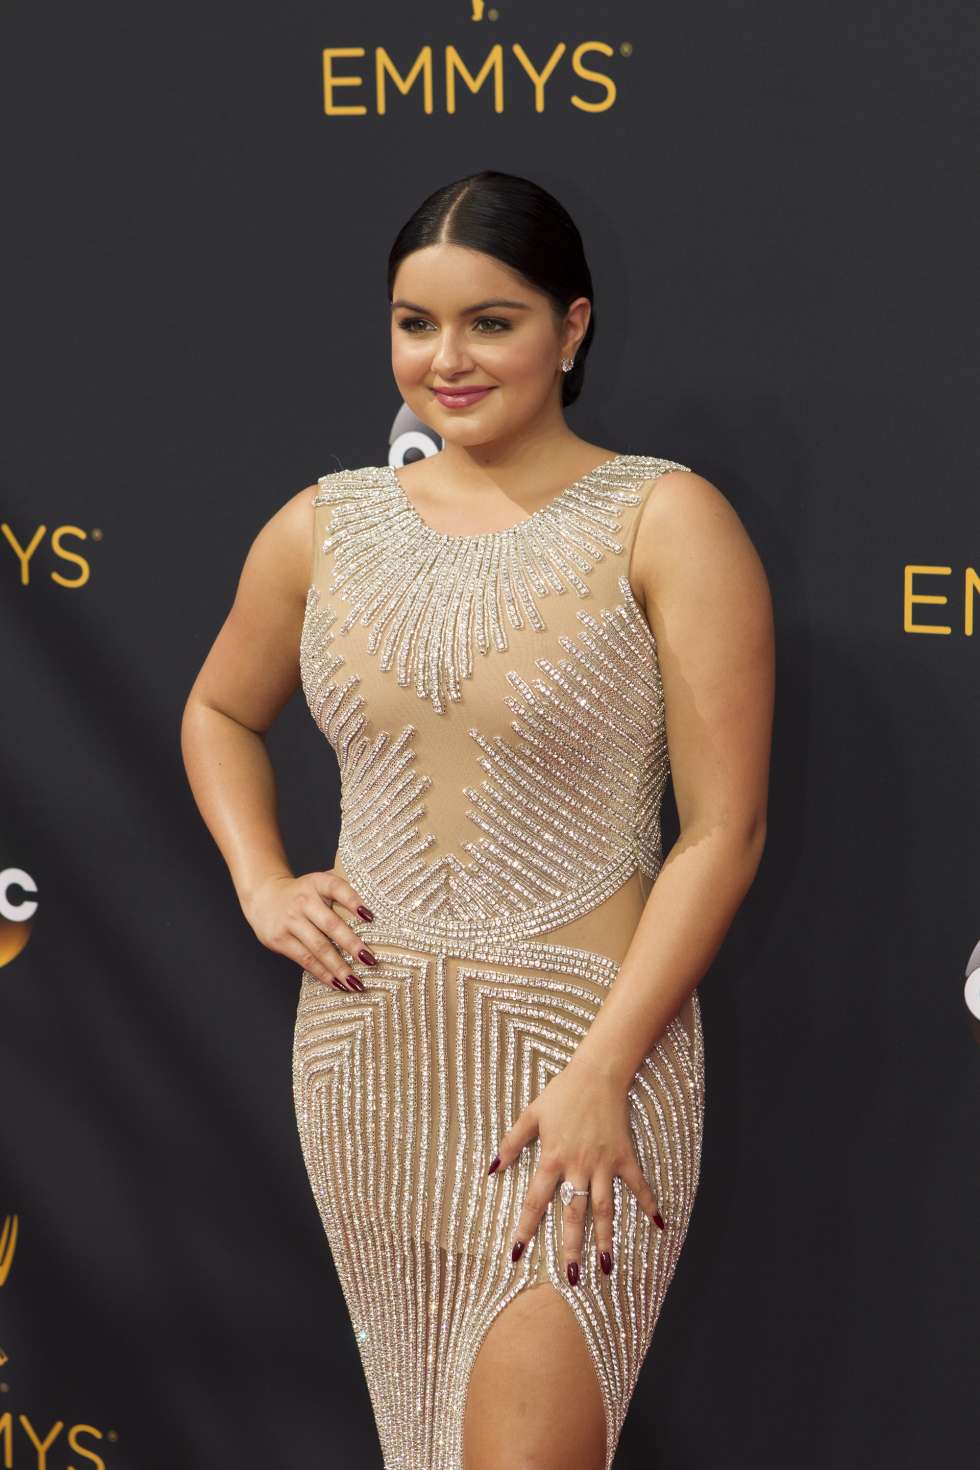 5 Beautiful Dresses at The Emmys by Arab Fashion Designers